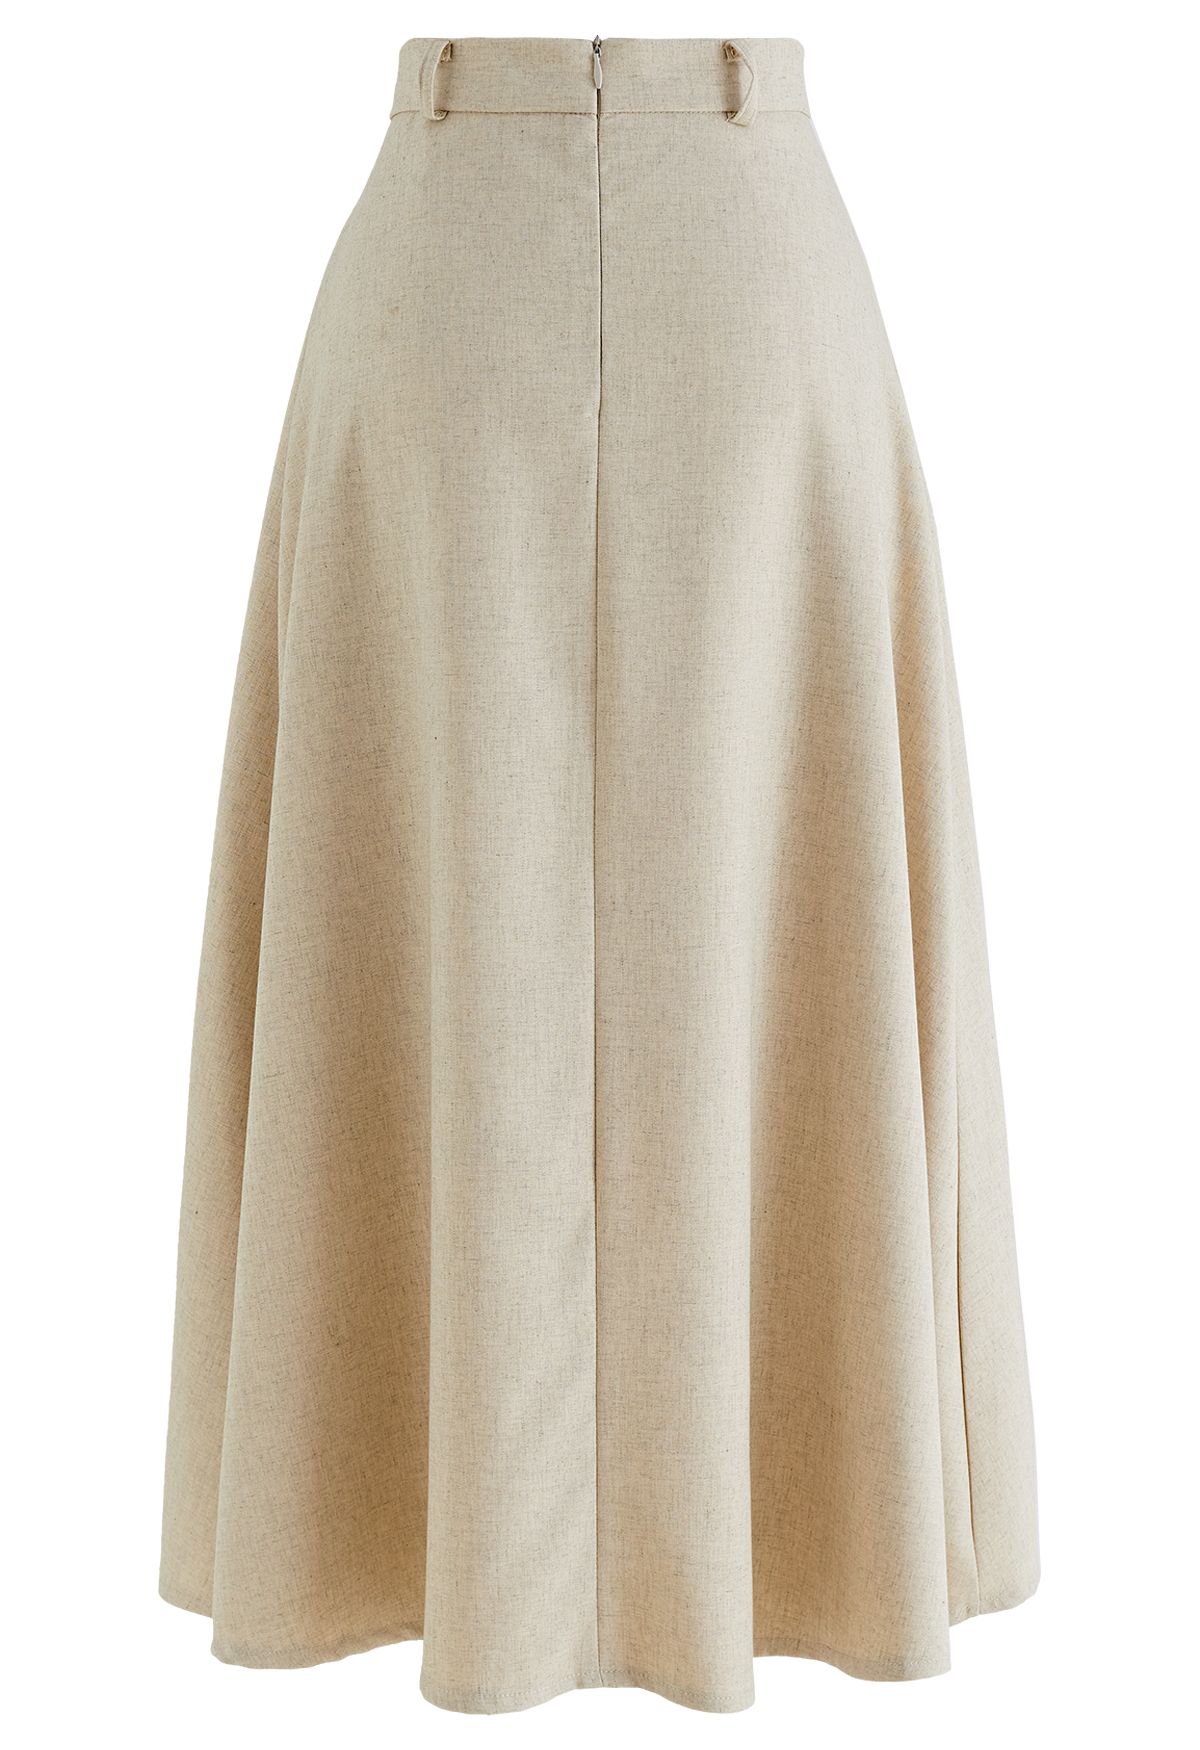 Elementary A-Line Maxi Skirt in Sand